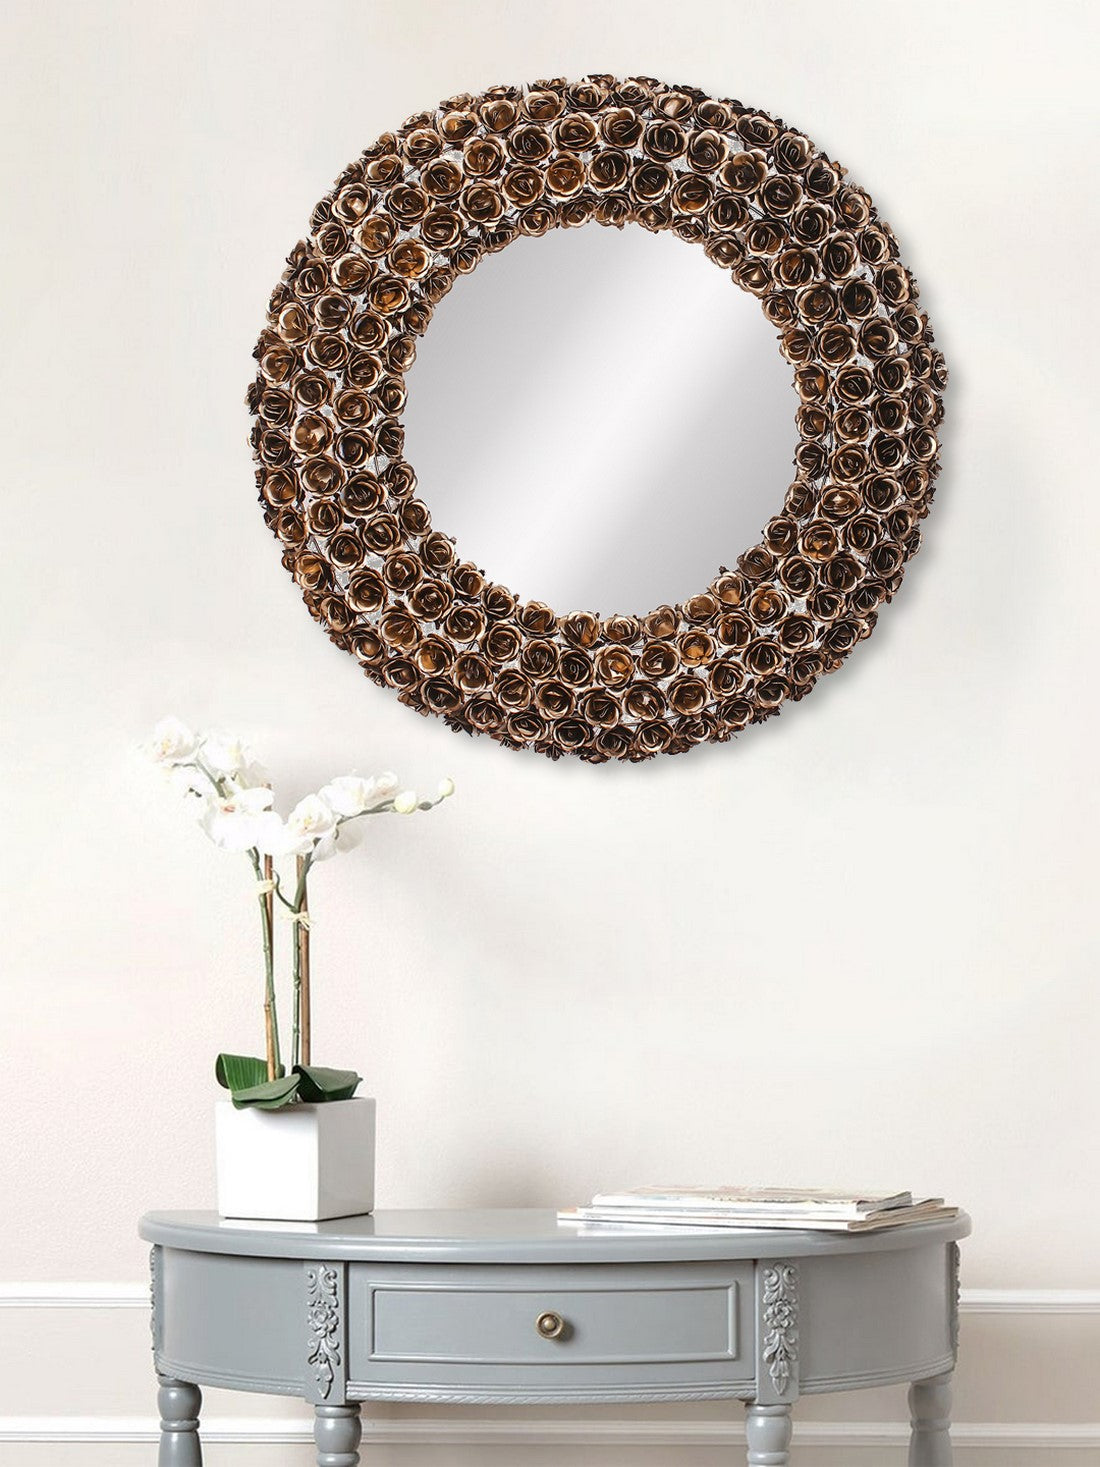 Golden, Brown and Black Decorative Metal Handcarved Wall Mirror